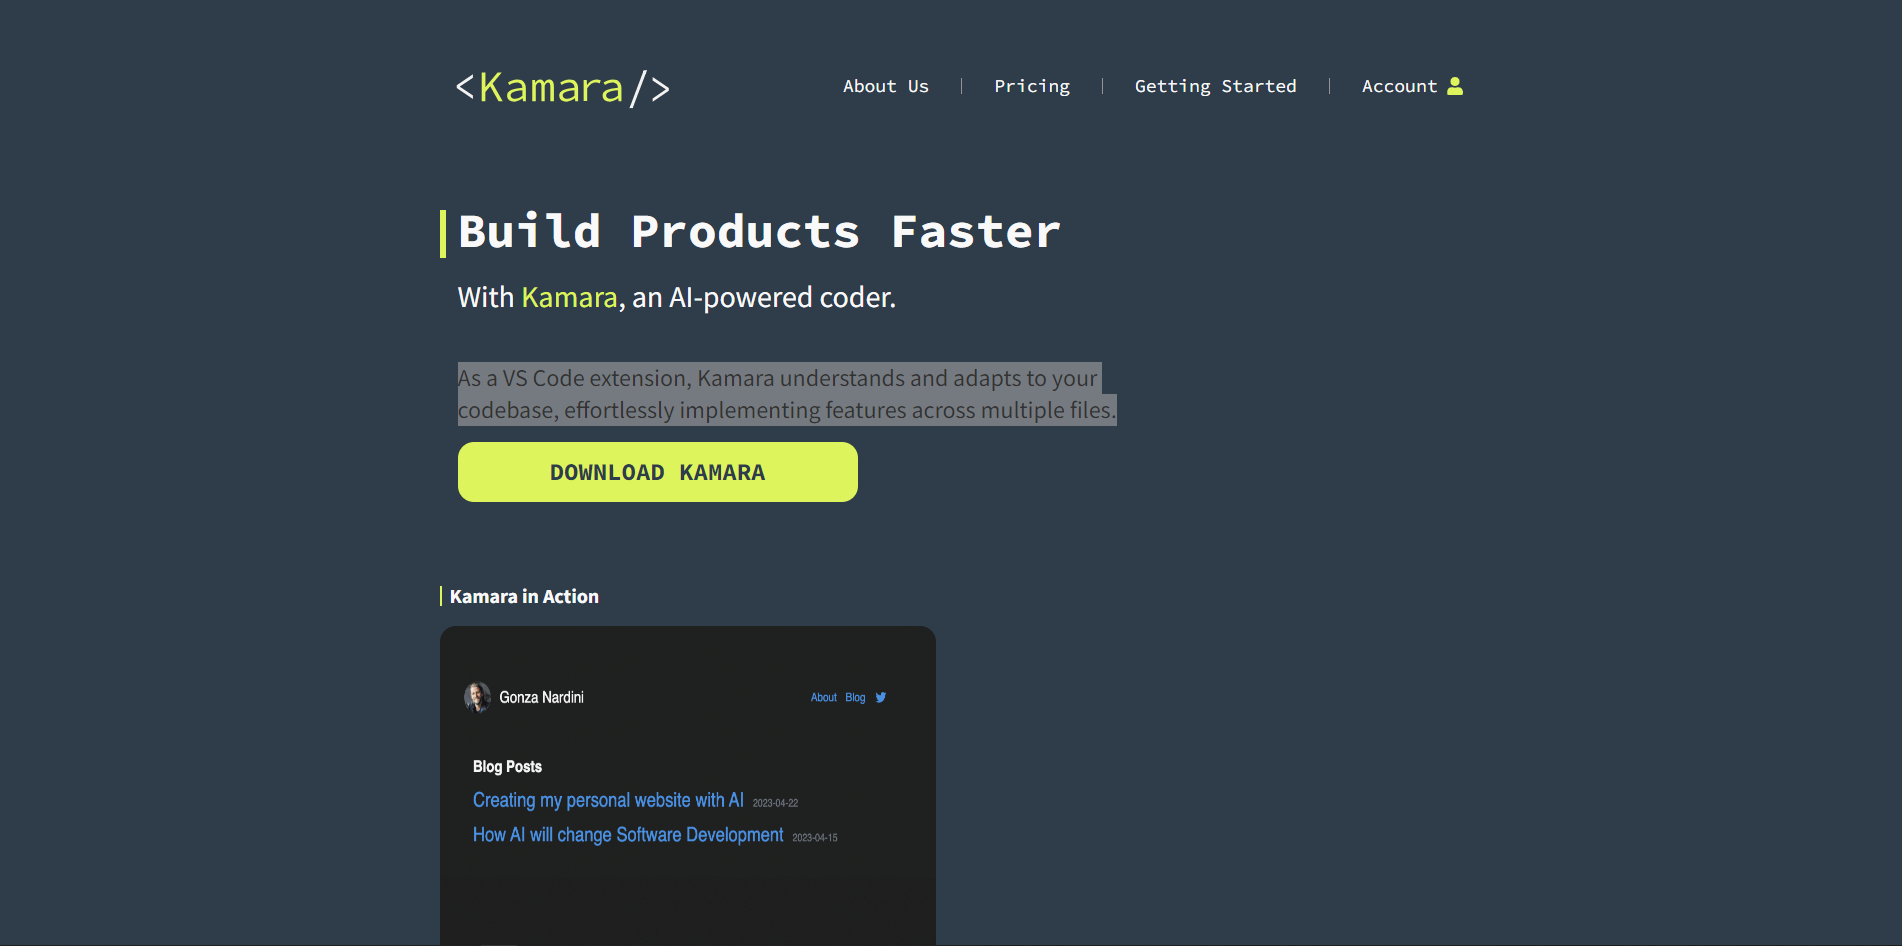 kamaraapp.com | As a VS Code extension, Kamara understands and adapts to your codebase, effortlessly implementing features across multiple files.